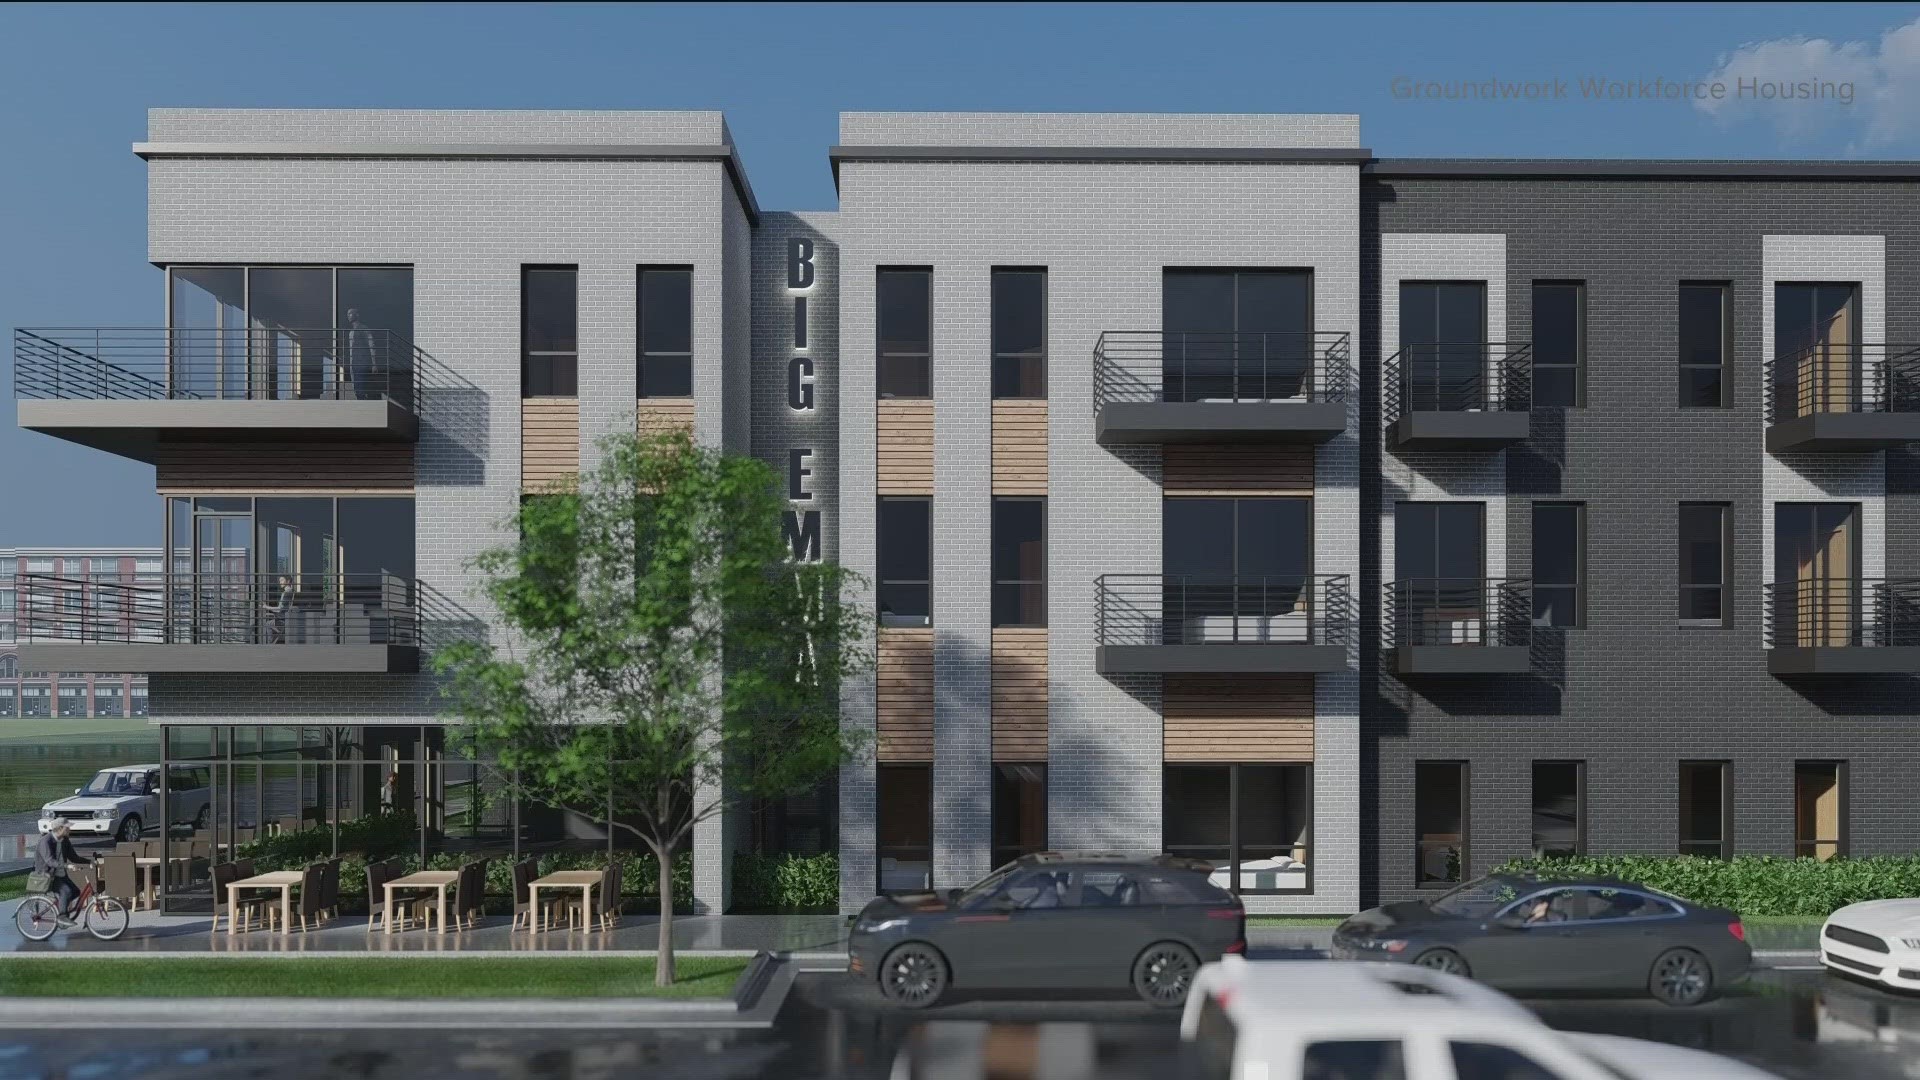 WELL TODAY – DEVELOPERS BROKE GROUND ON THE "BIG EMMA" HOUSING PROJECT IN DOWNTOWN SPRINGDALE THAT WILL HELP AT LEAST A FEW DOZEN PEOPLE WITH THIS PROBLEM...